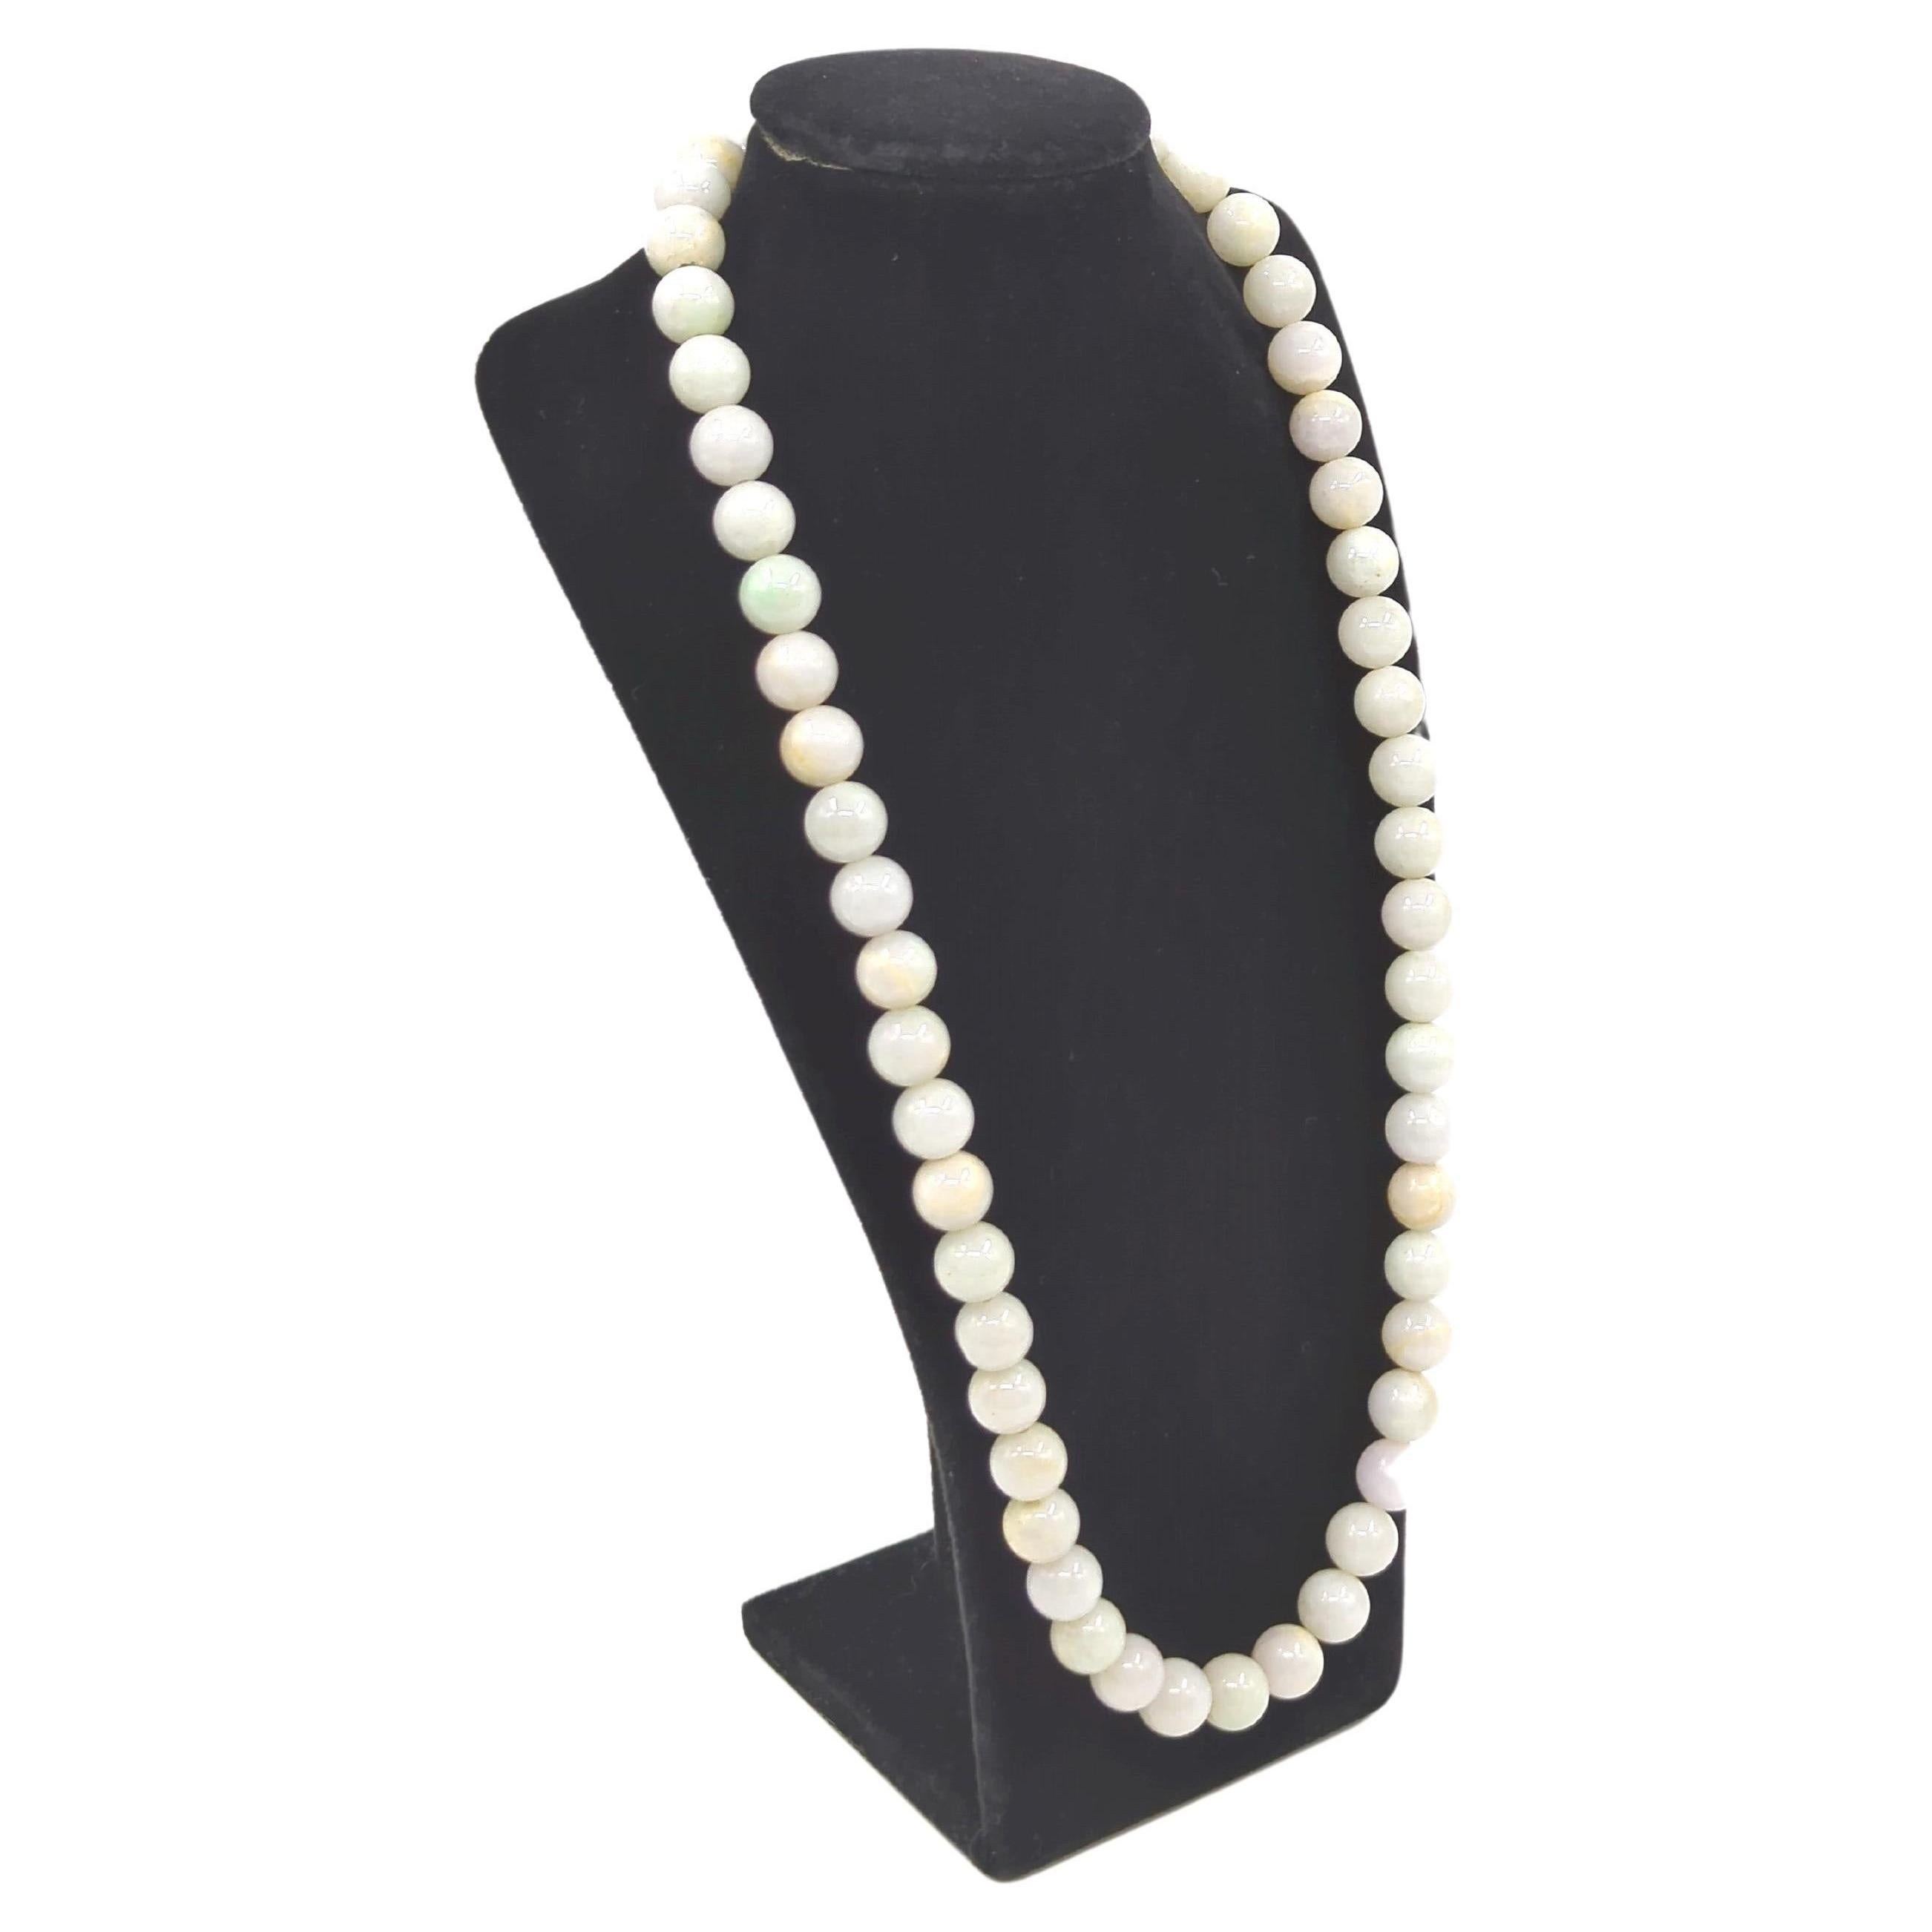 This mid-century natural jadeite beaded necklace is comprising of 55 meticulously selected jadeite beads, each measuring approximately 11mm in diameter, the necklace achieves a total length of 23 inches, making it a versatile and sophisticated